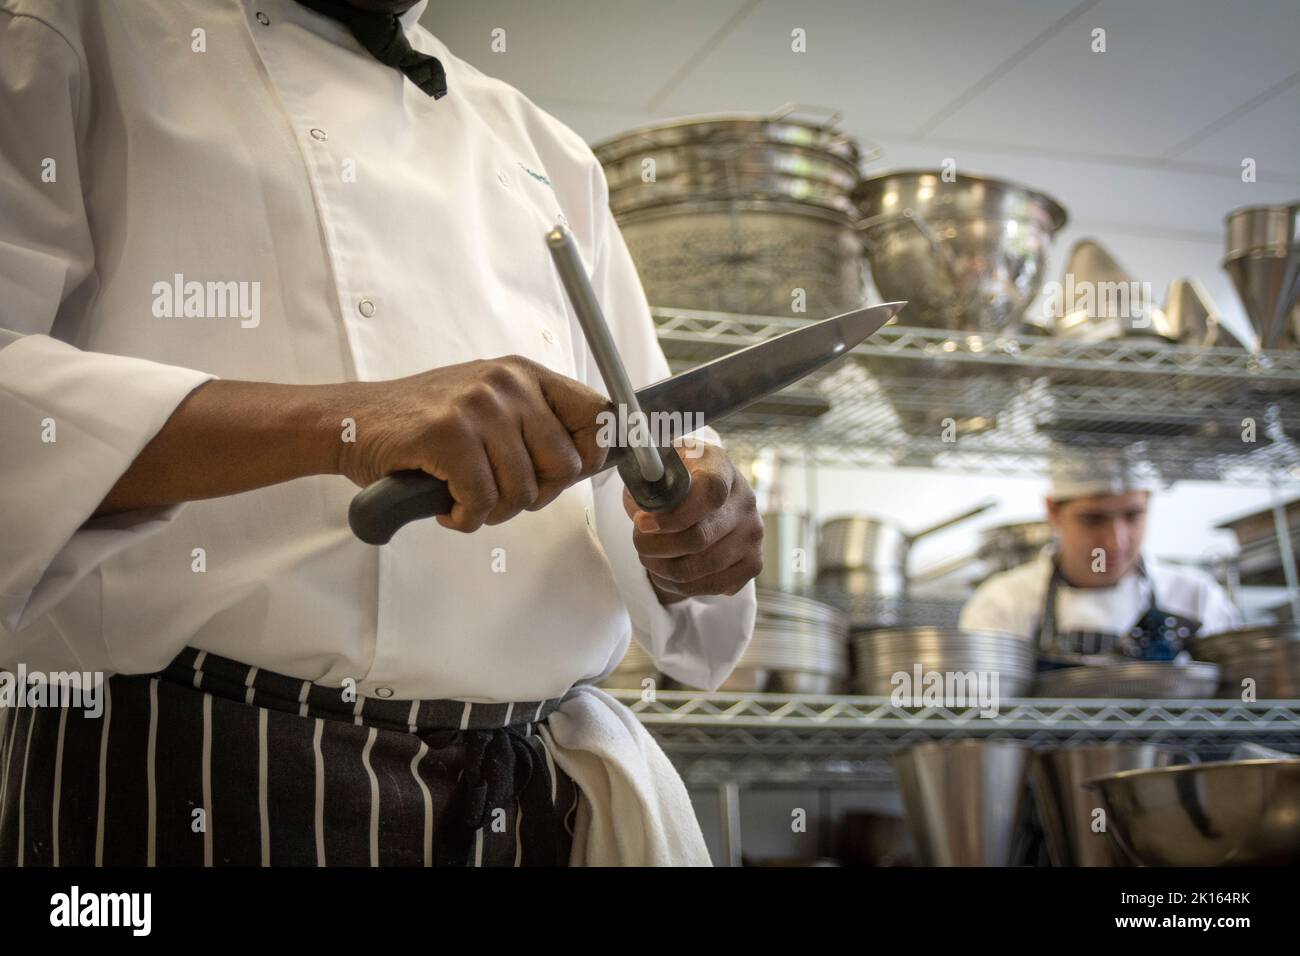 a chef sharpening his knife to prepare and chop vegetables in the kitchen of the restaurant Stock Photo